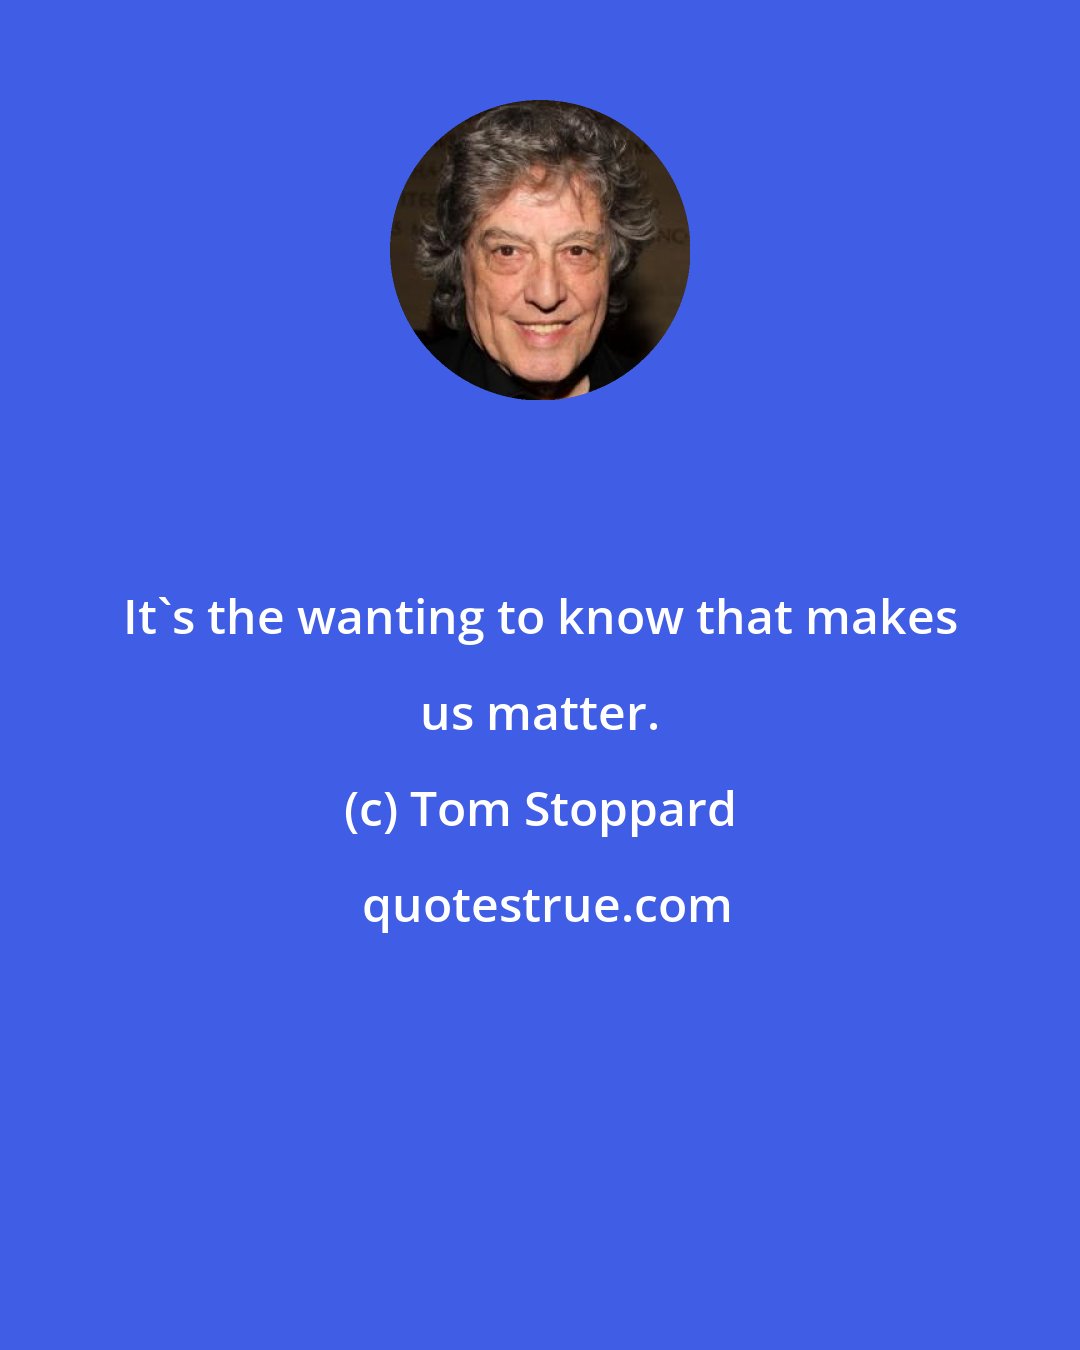 Tom Stoppard: It's the wanting to know that makes us matter.